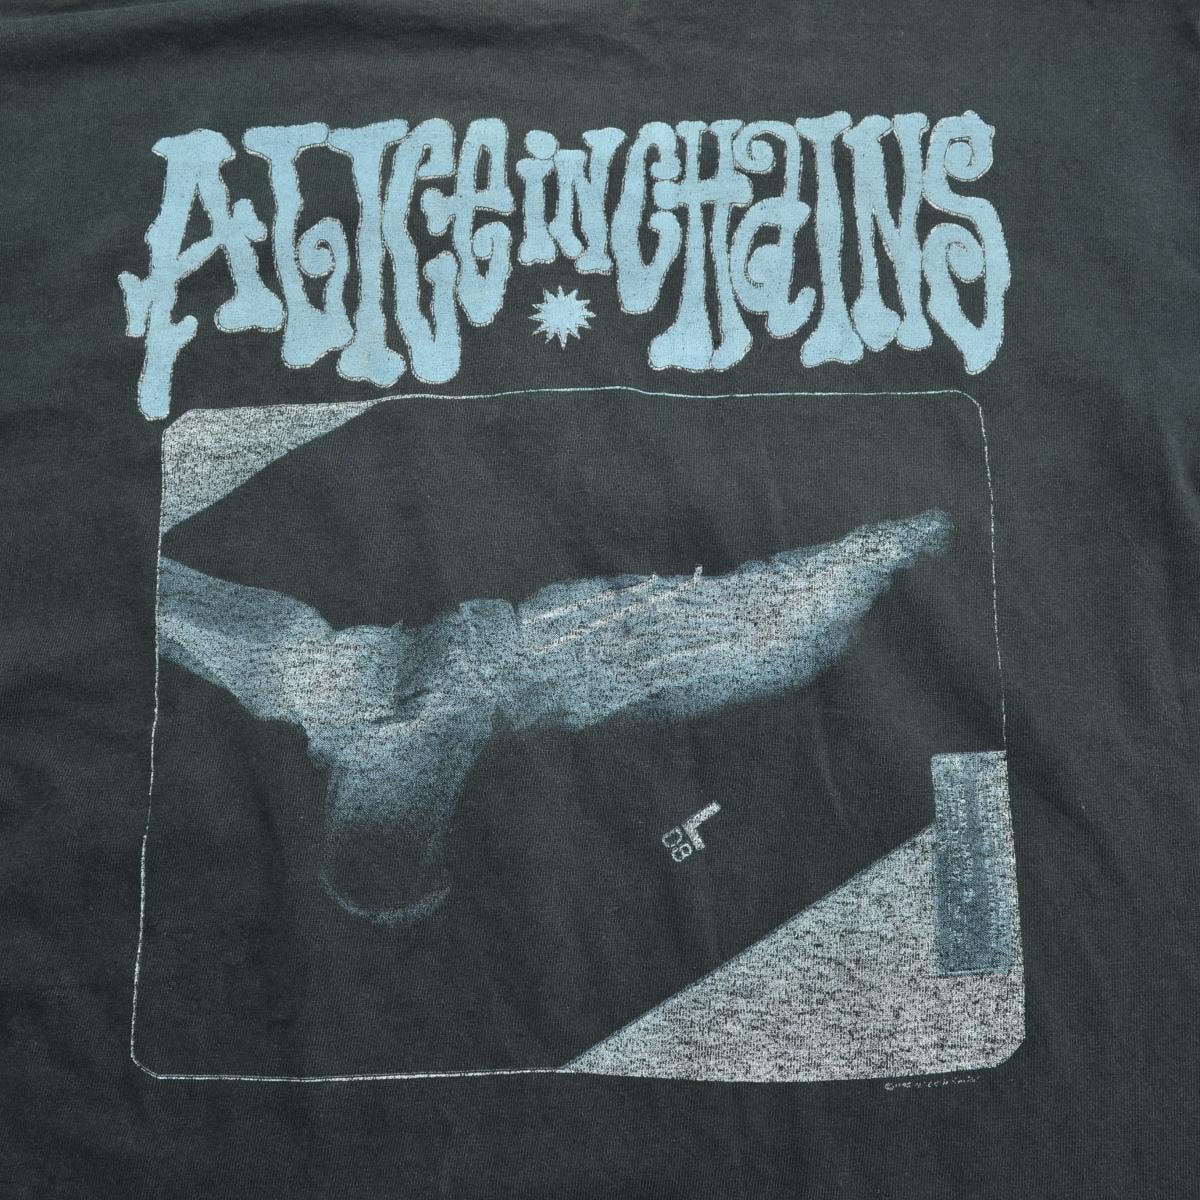 1992 Alice in chains ‘X-ray’ Tシャツ　ヴィンテージ